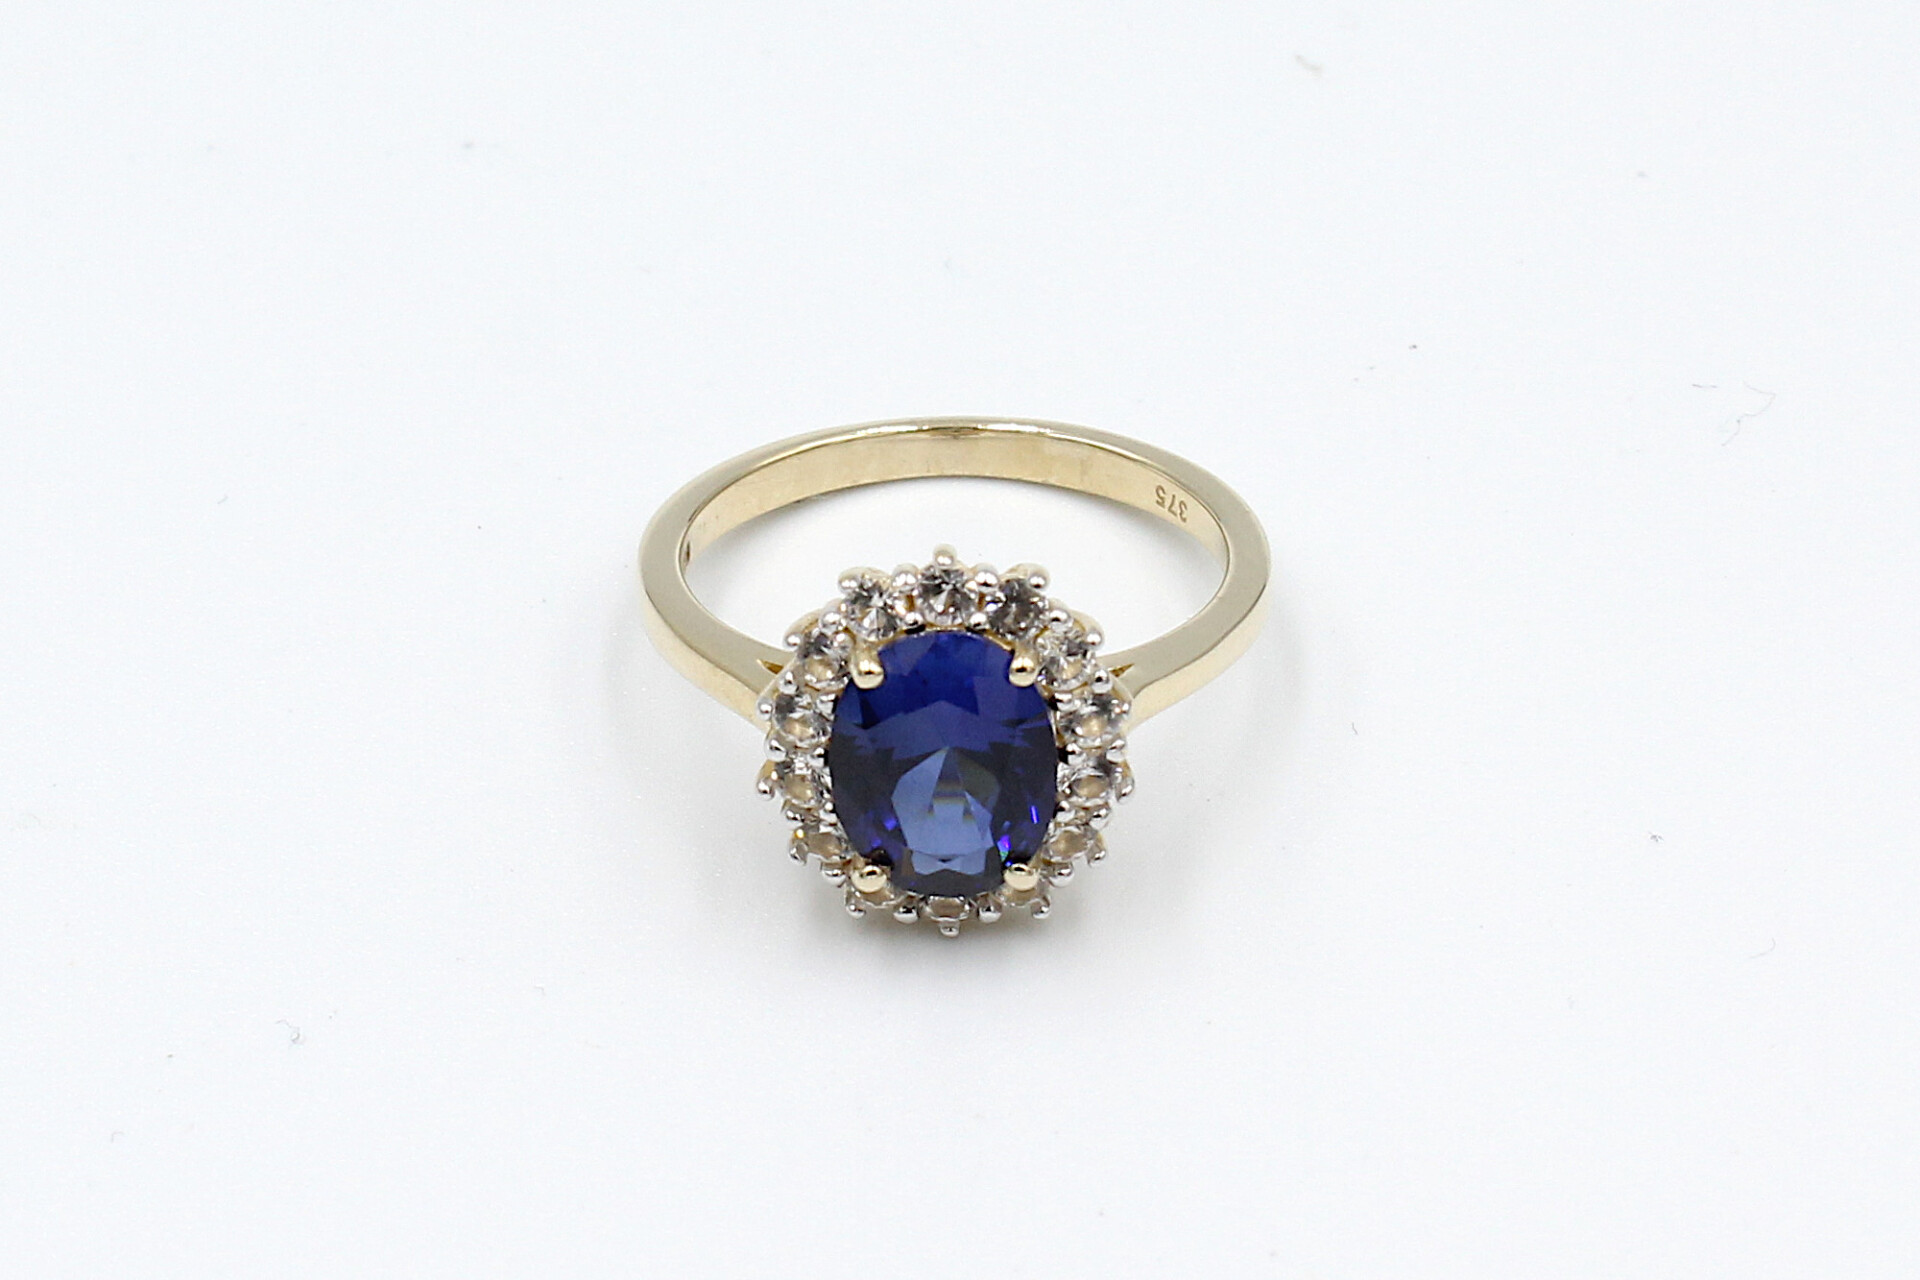 top view of a faux sapphire halo engagement ring